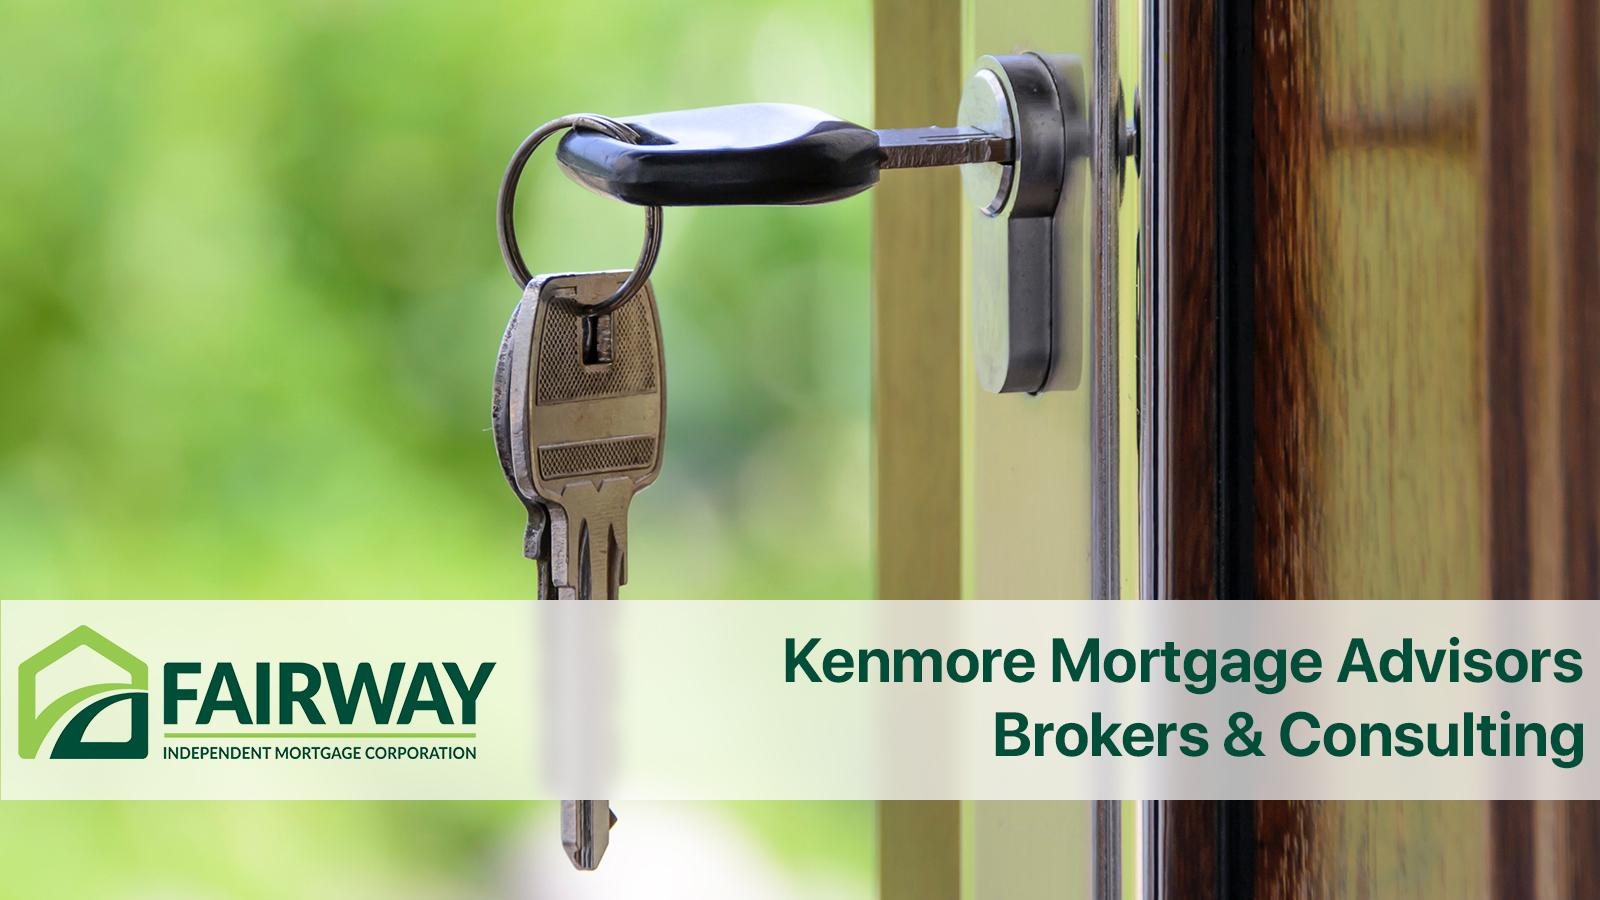 Kenmore-Mortgage-Advisors-Brokers-Consulting